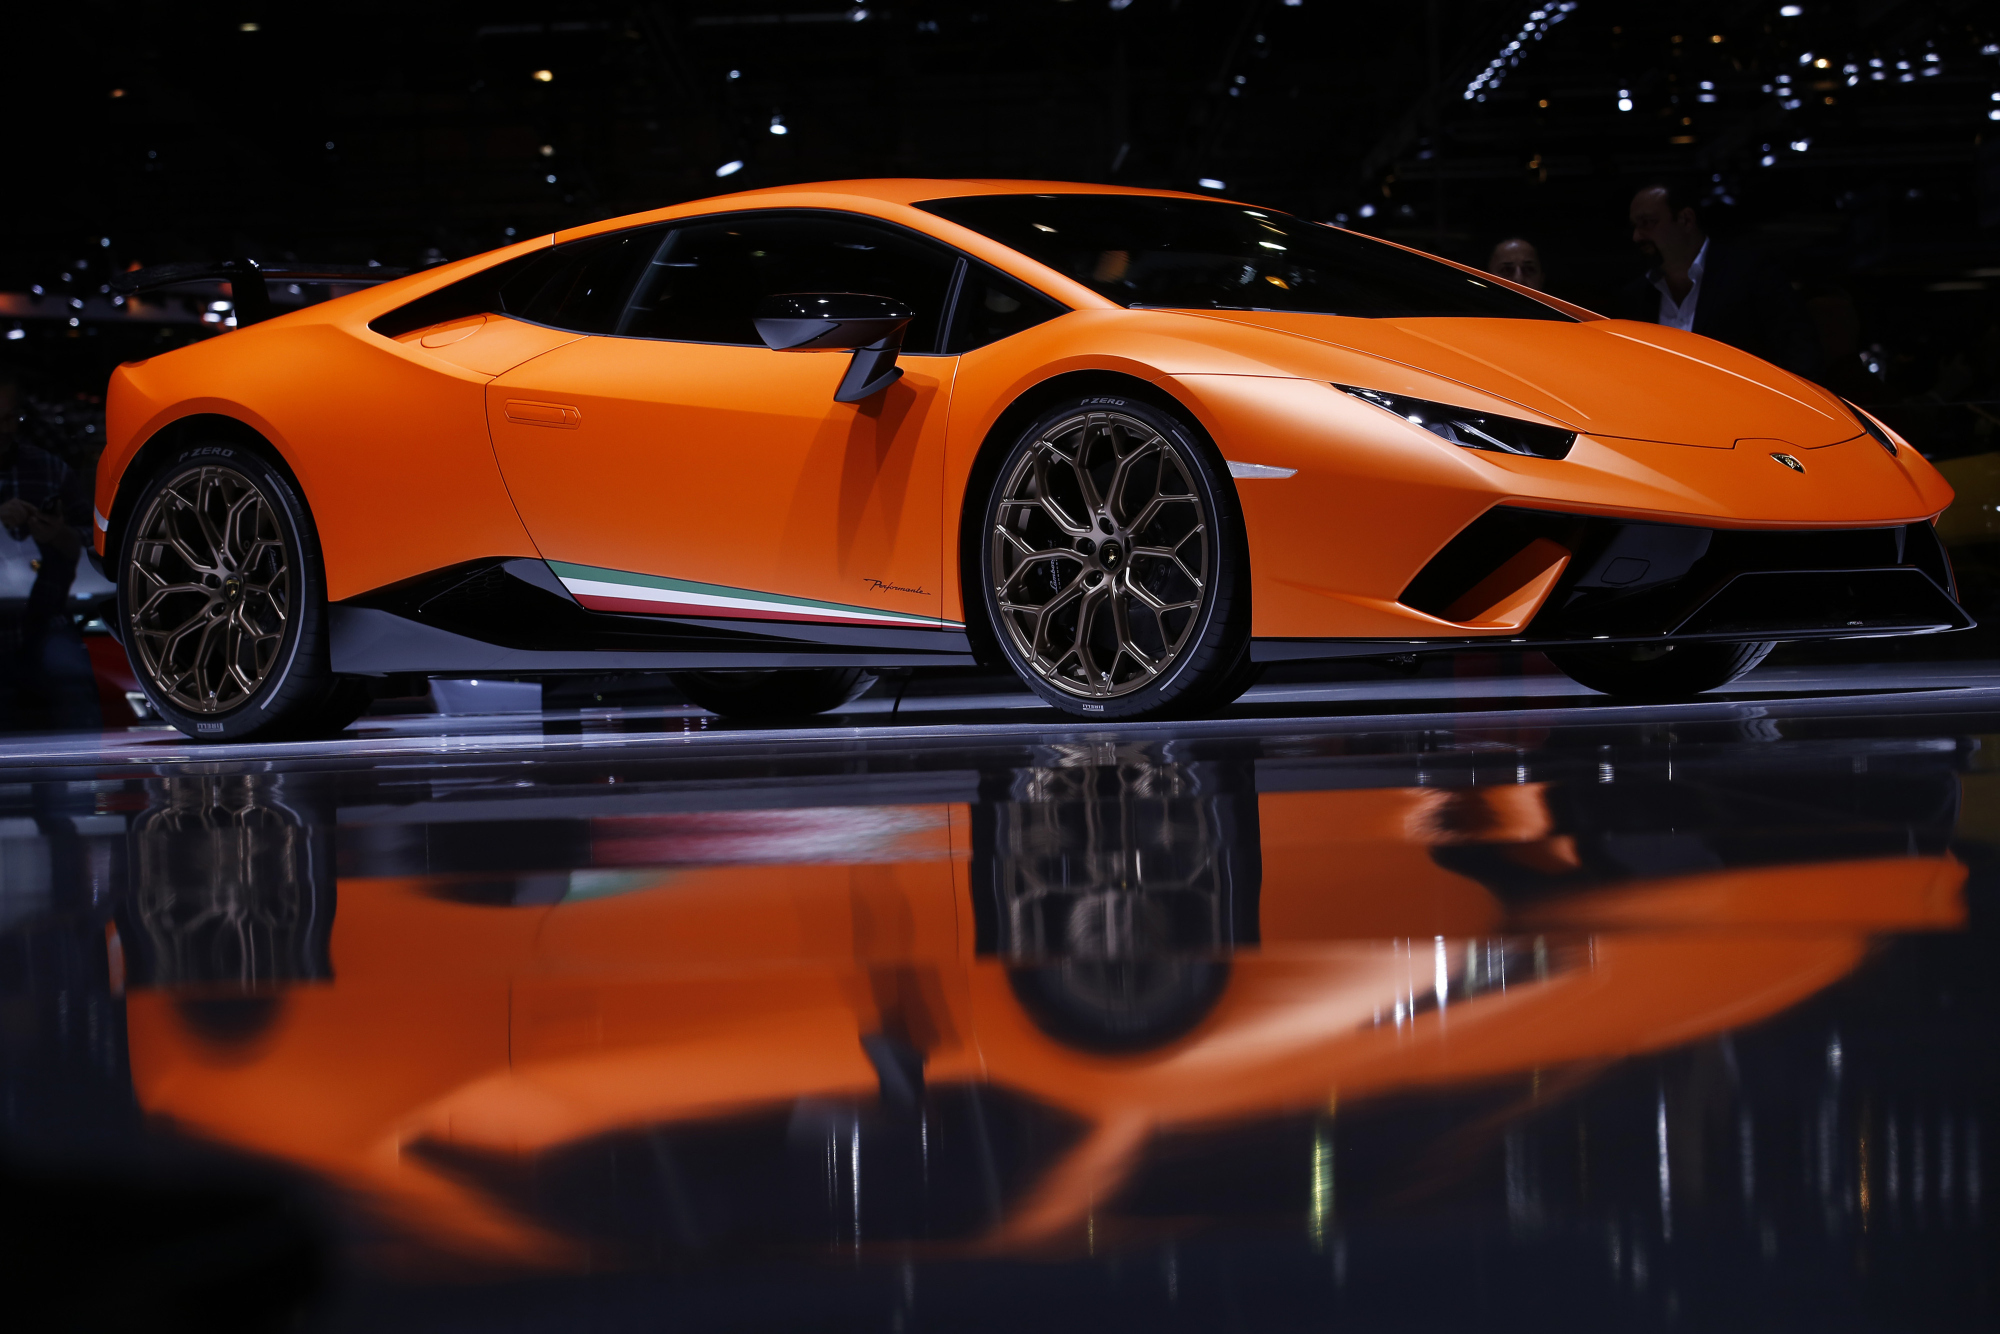 Luigi Taraborrell&nbsp;worked on Lamborghini models such as the Urus, Huracan and Aventador, in addition to more limited models like the Huracan Sterrato off-road vehicle and Asterion concept car.&nbsp;